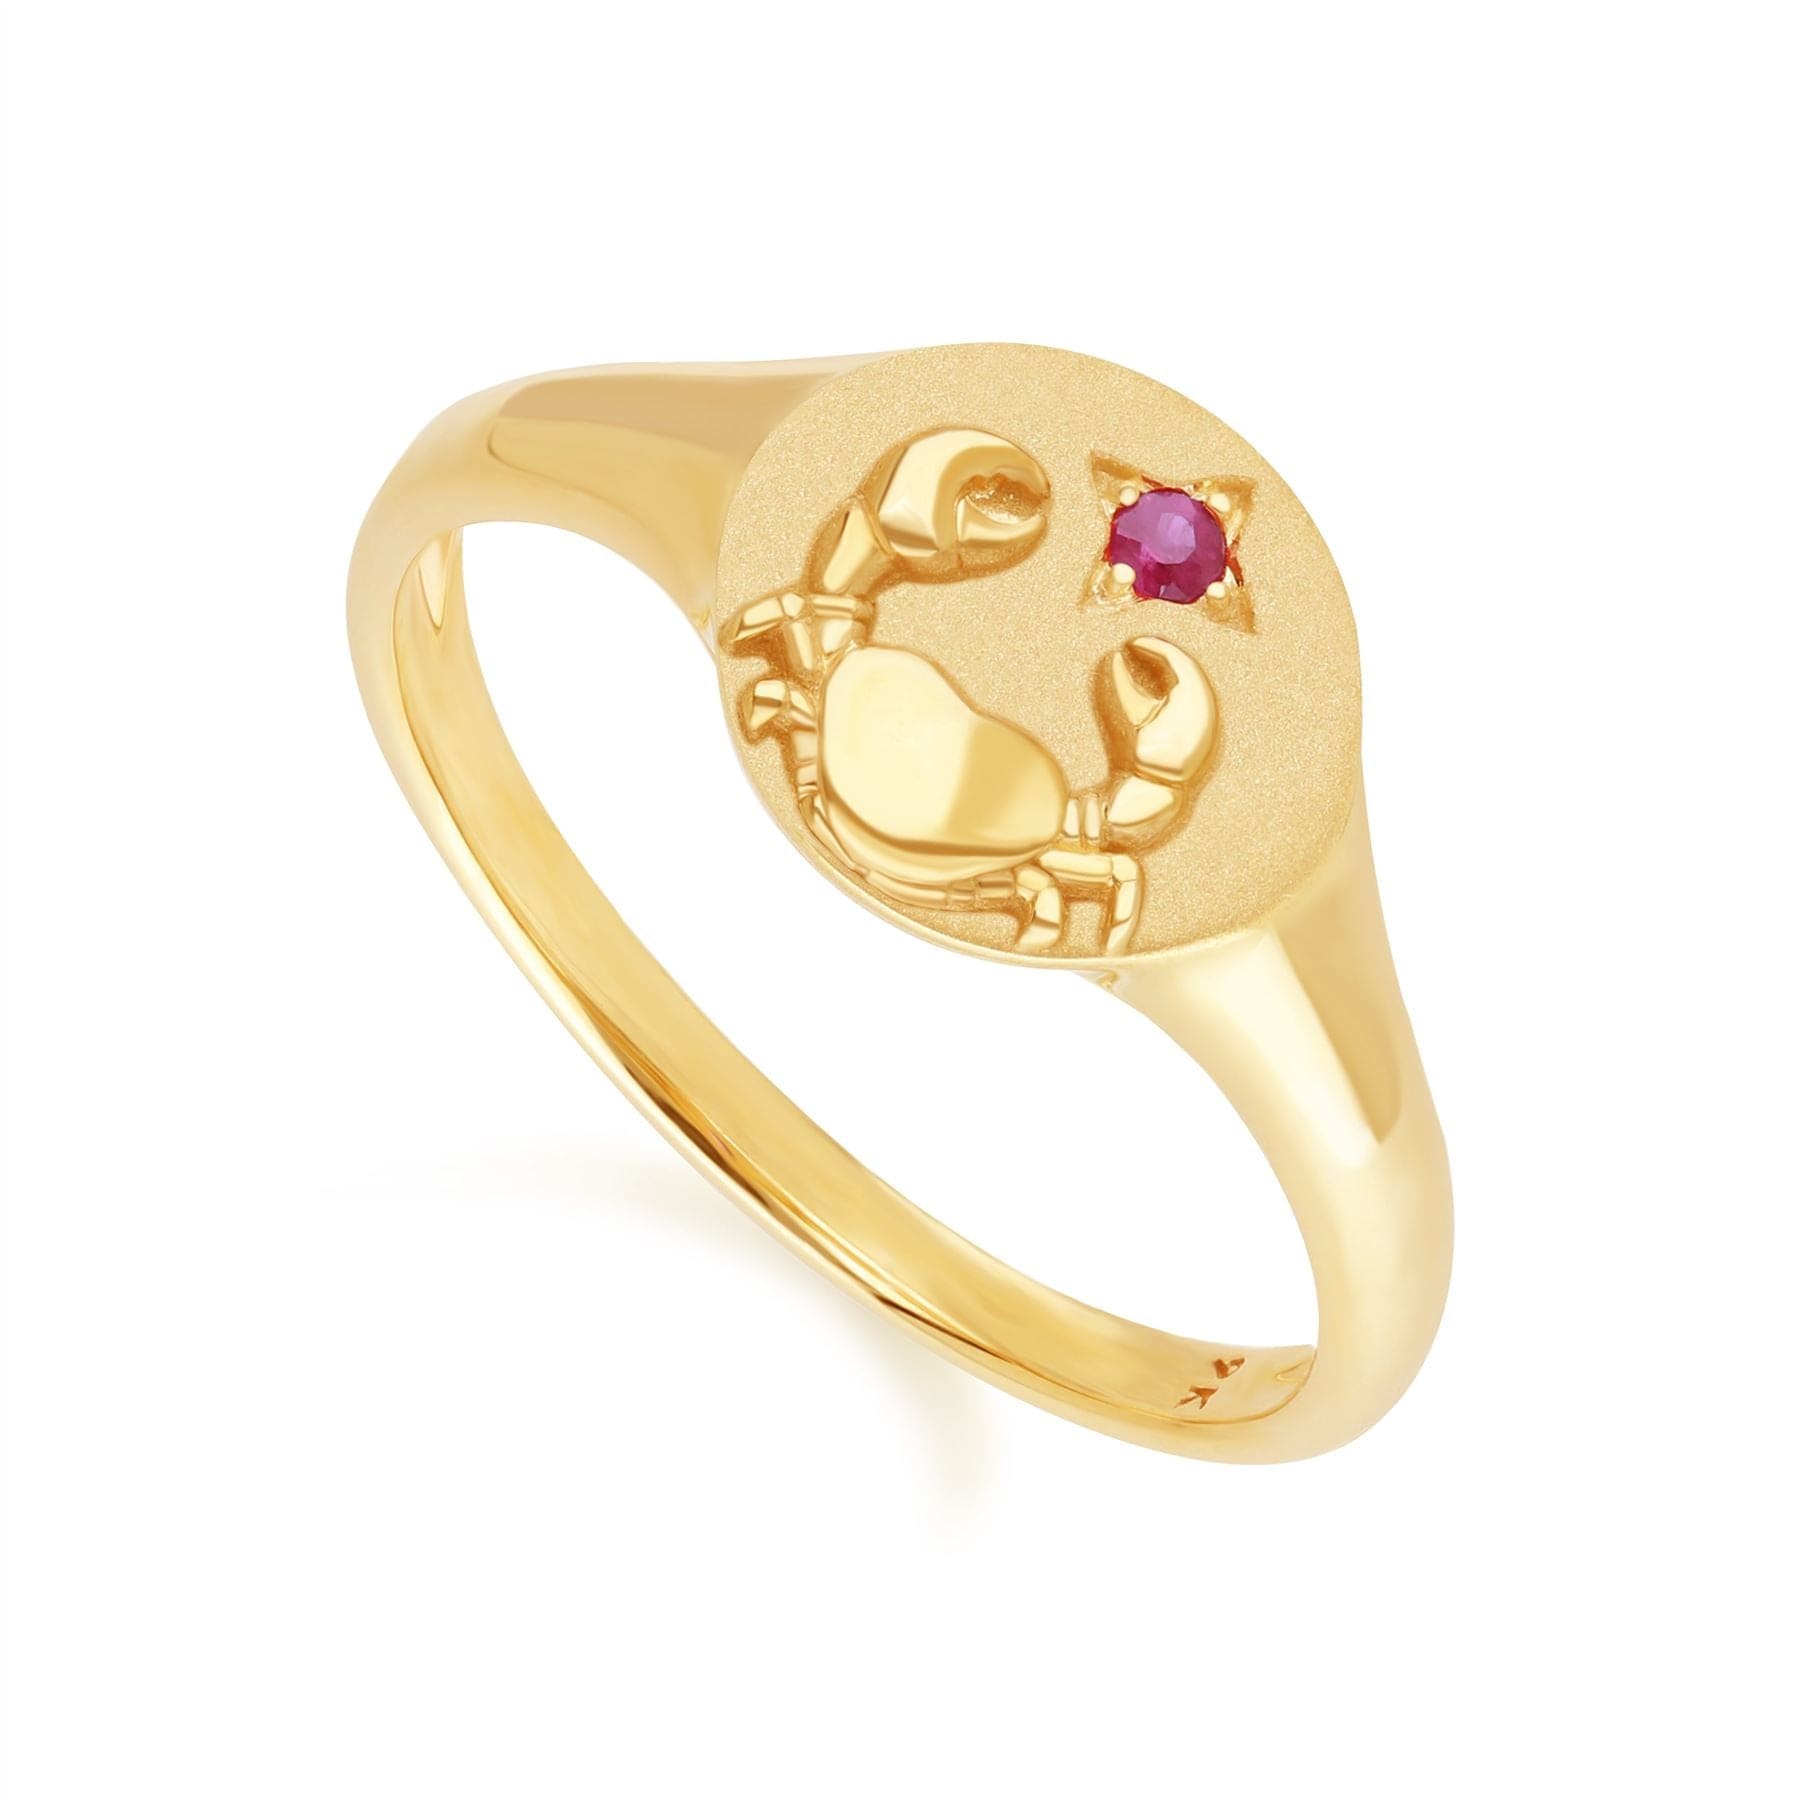 "Zodiac Ruby Cancer Signet Ring In 9ct Yellow GoldSide  135R2085019